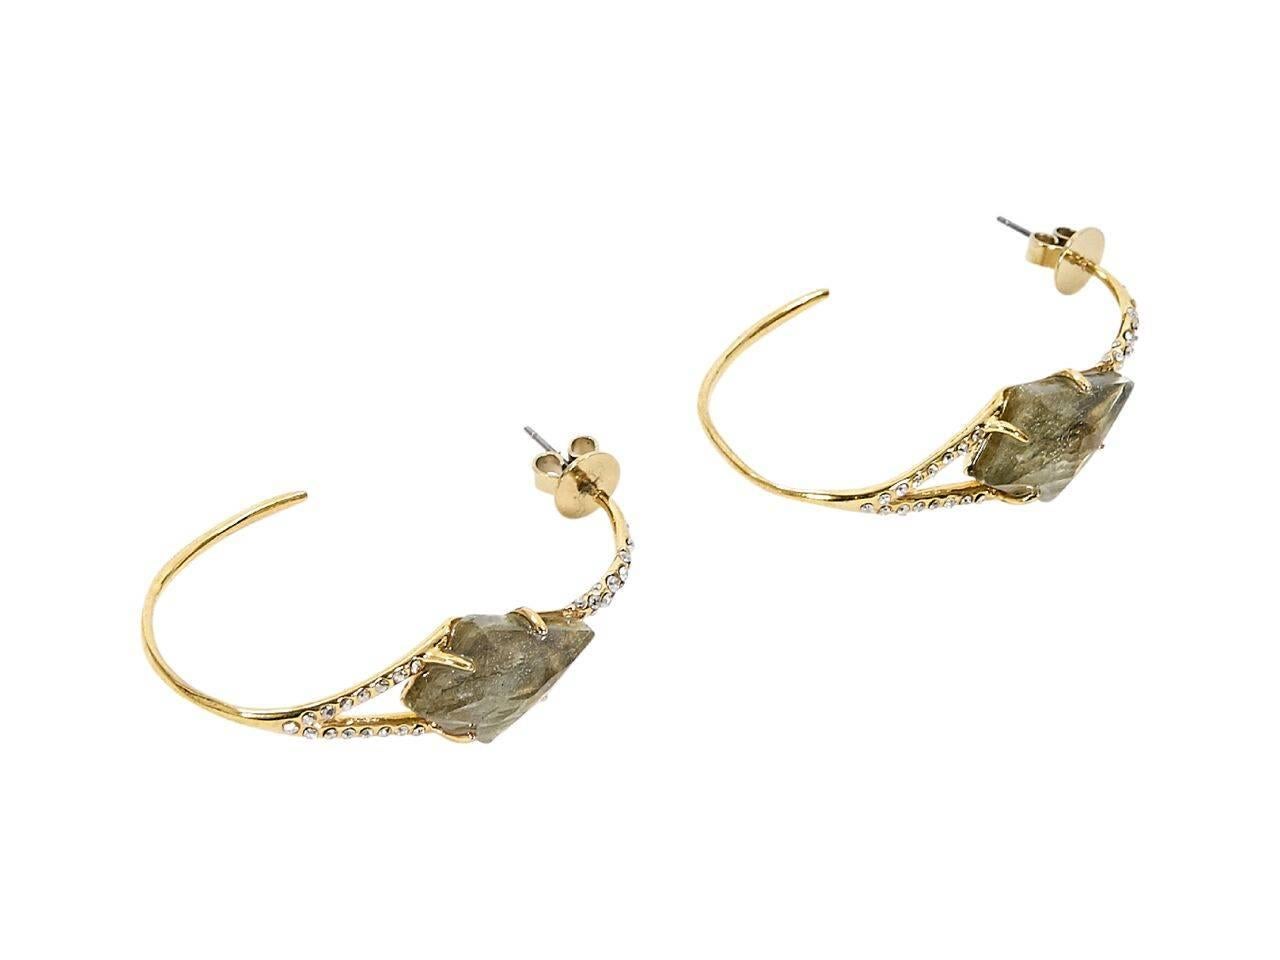 Product details:  Goldtone hoop earrings by Alexis Bittar.  Embellished with crystals and a faceted stone.  Post closure.  
Condition: Pre-owned. Very good.
Est. Retail $ 398.00